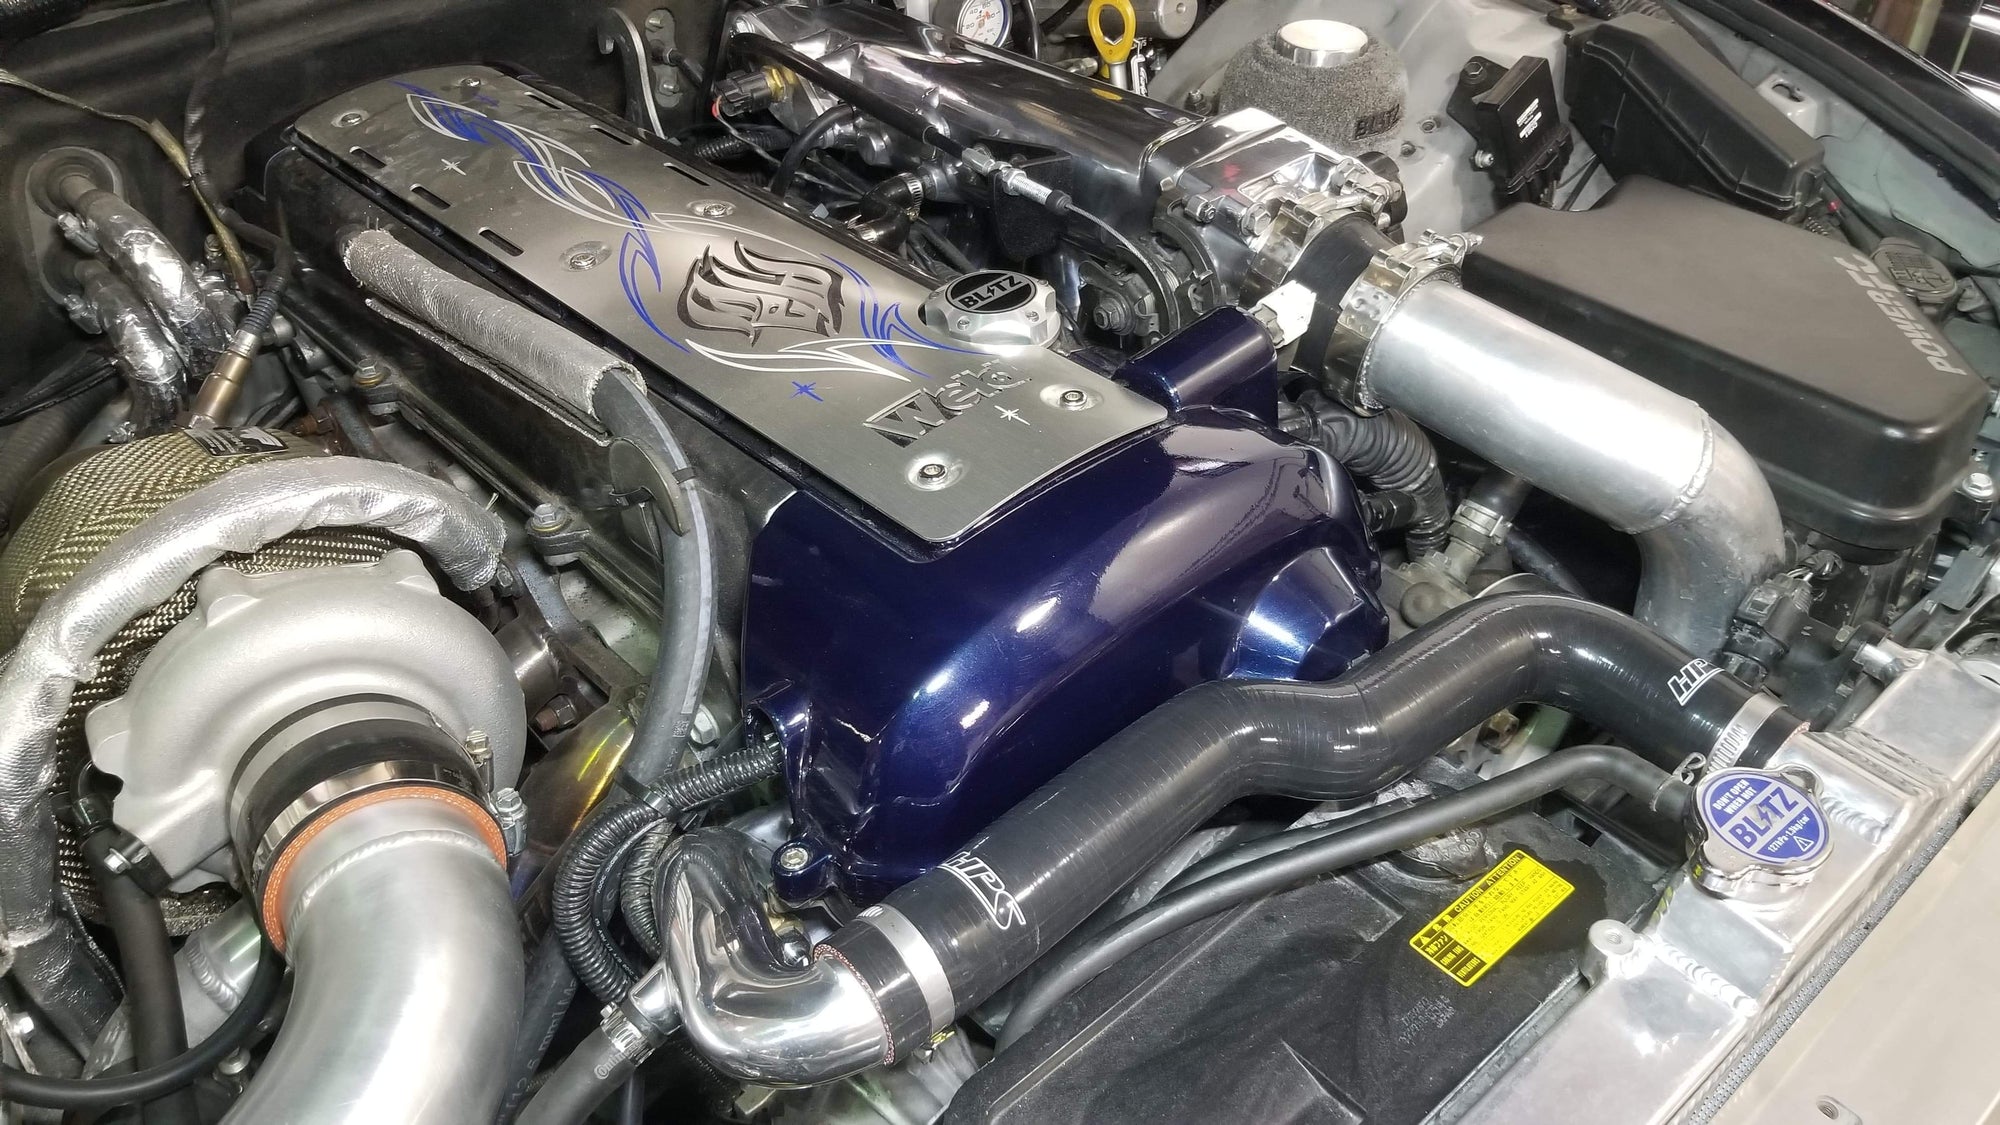 HPS Silicone Lower Upper Radiator Coolant Hoses Installed Lexus 01-05 IS300 1JZ GTE Swap 57-2066